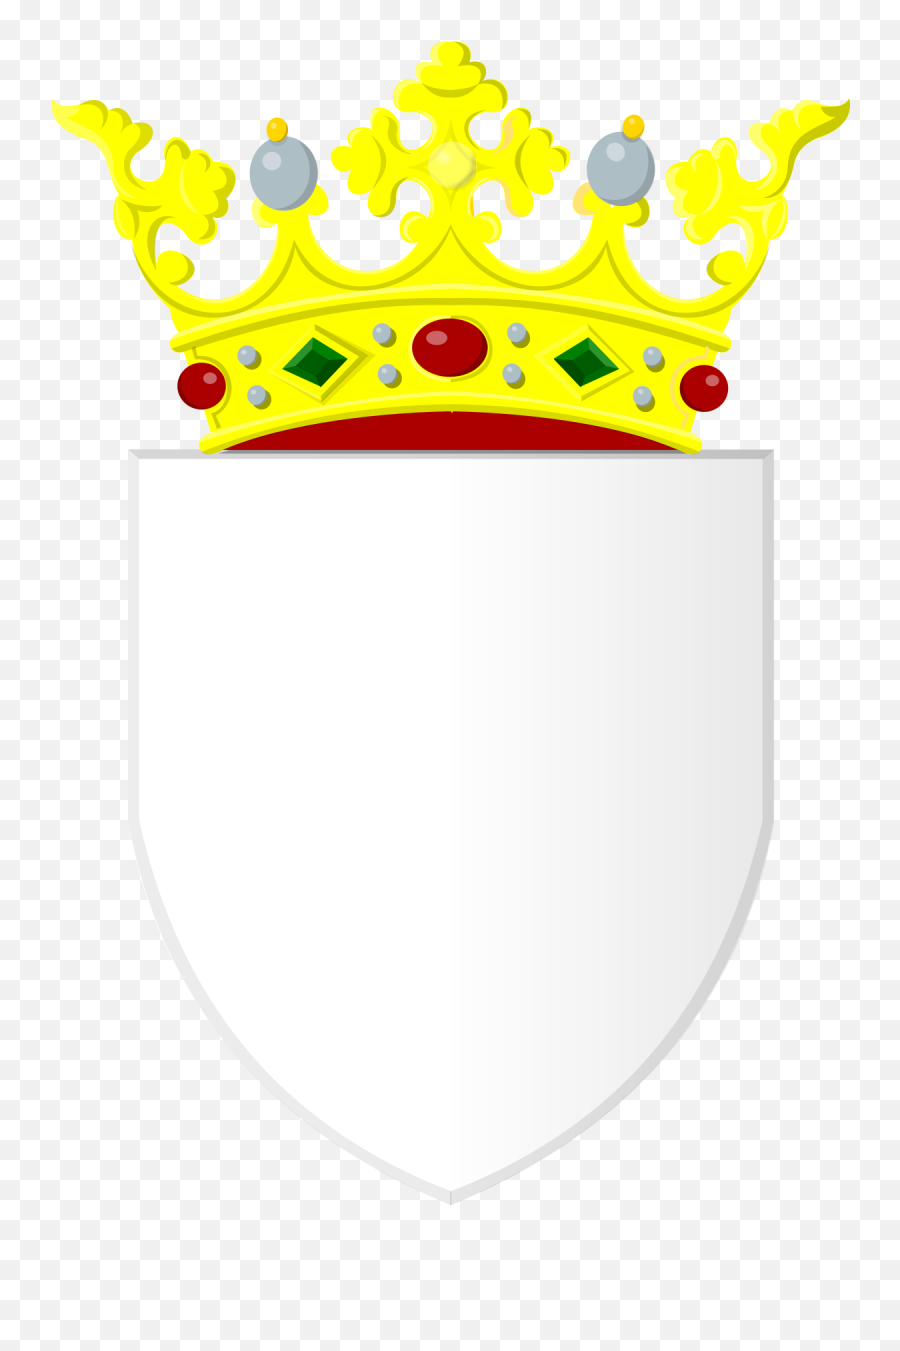 Filesilver Shield With Golden Crown 3svg - Wikimedia Commons Silver Png,Golden Crown Png